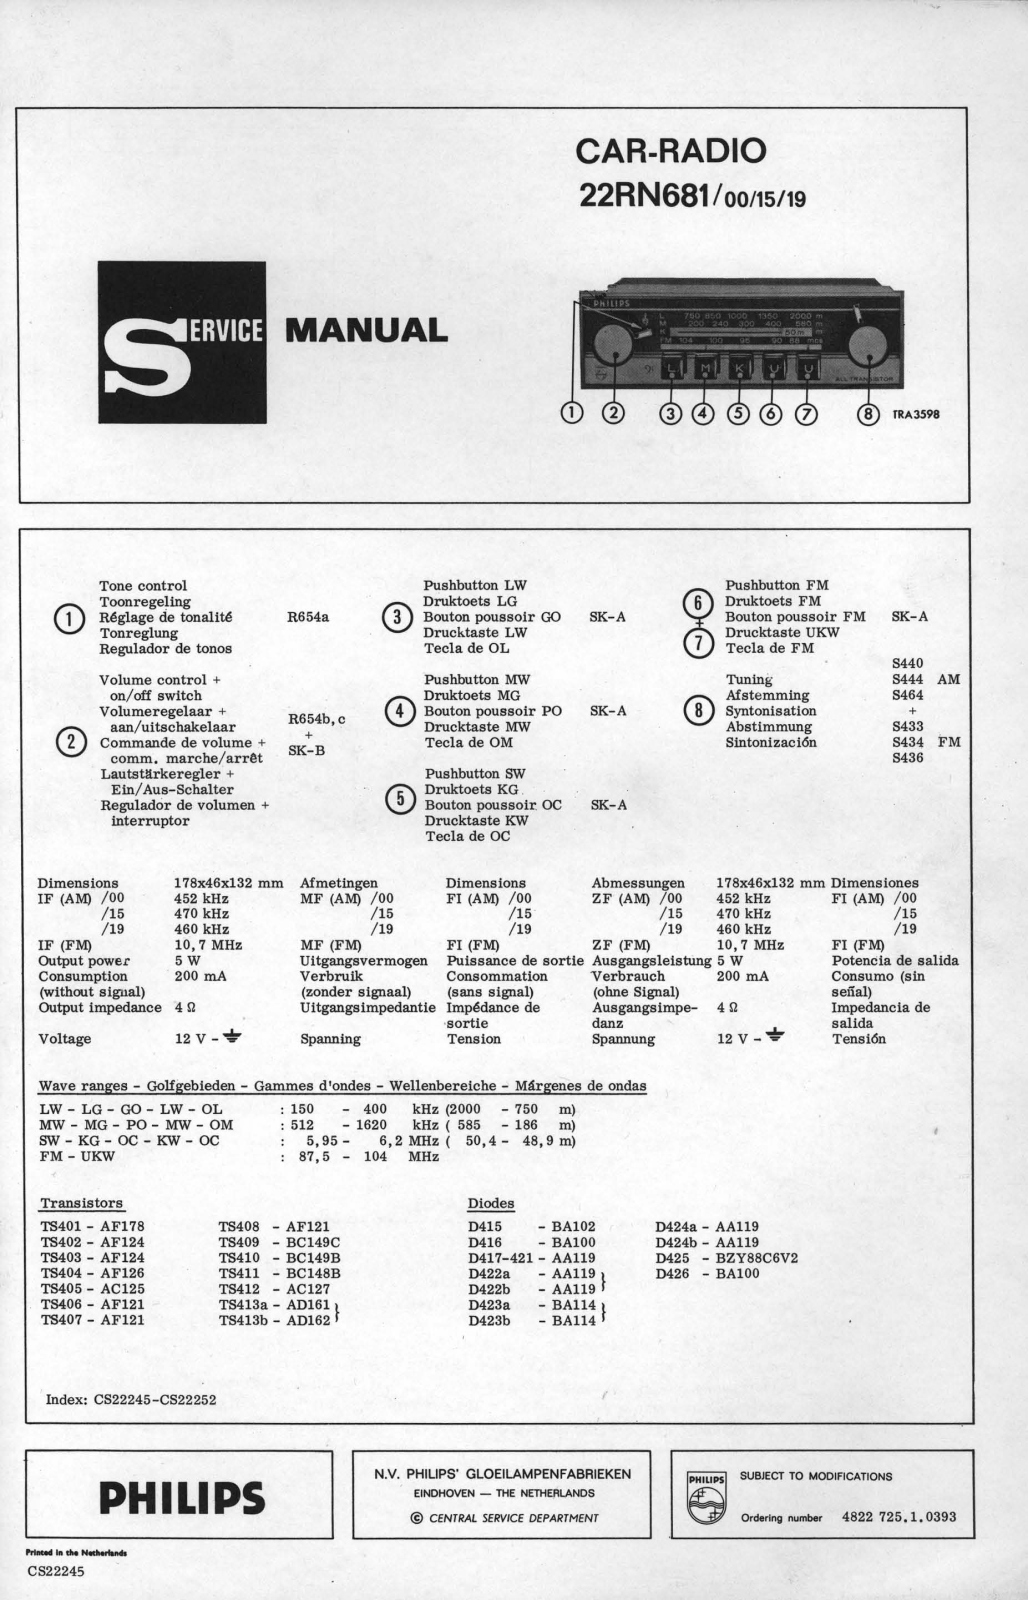 Philips 22-RN-681 Service Manual